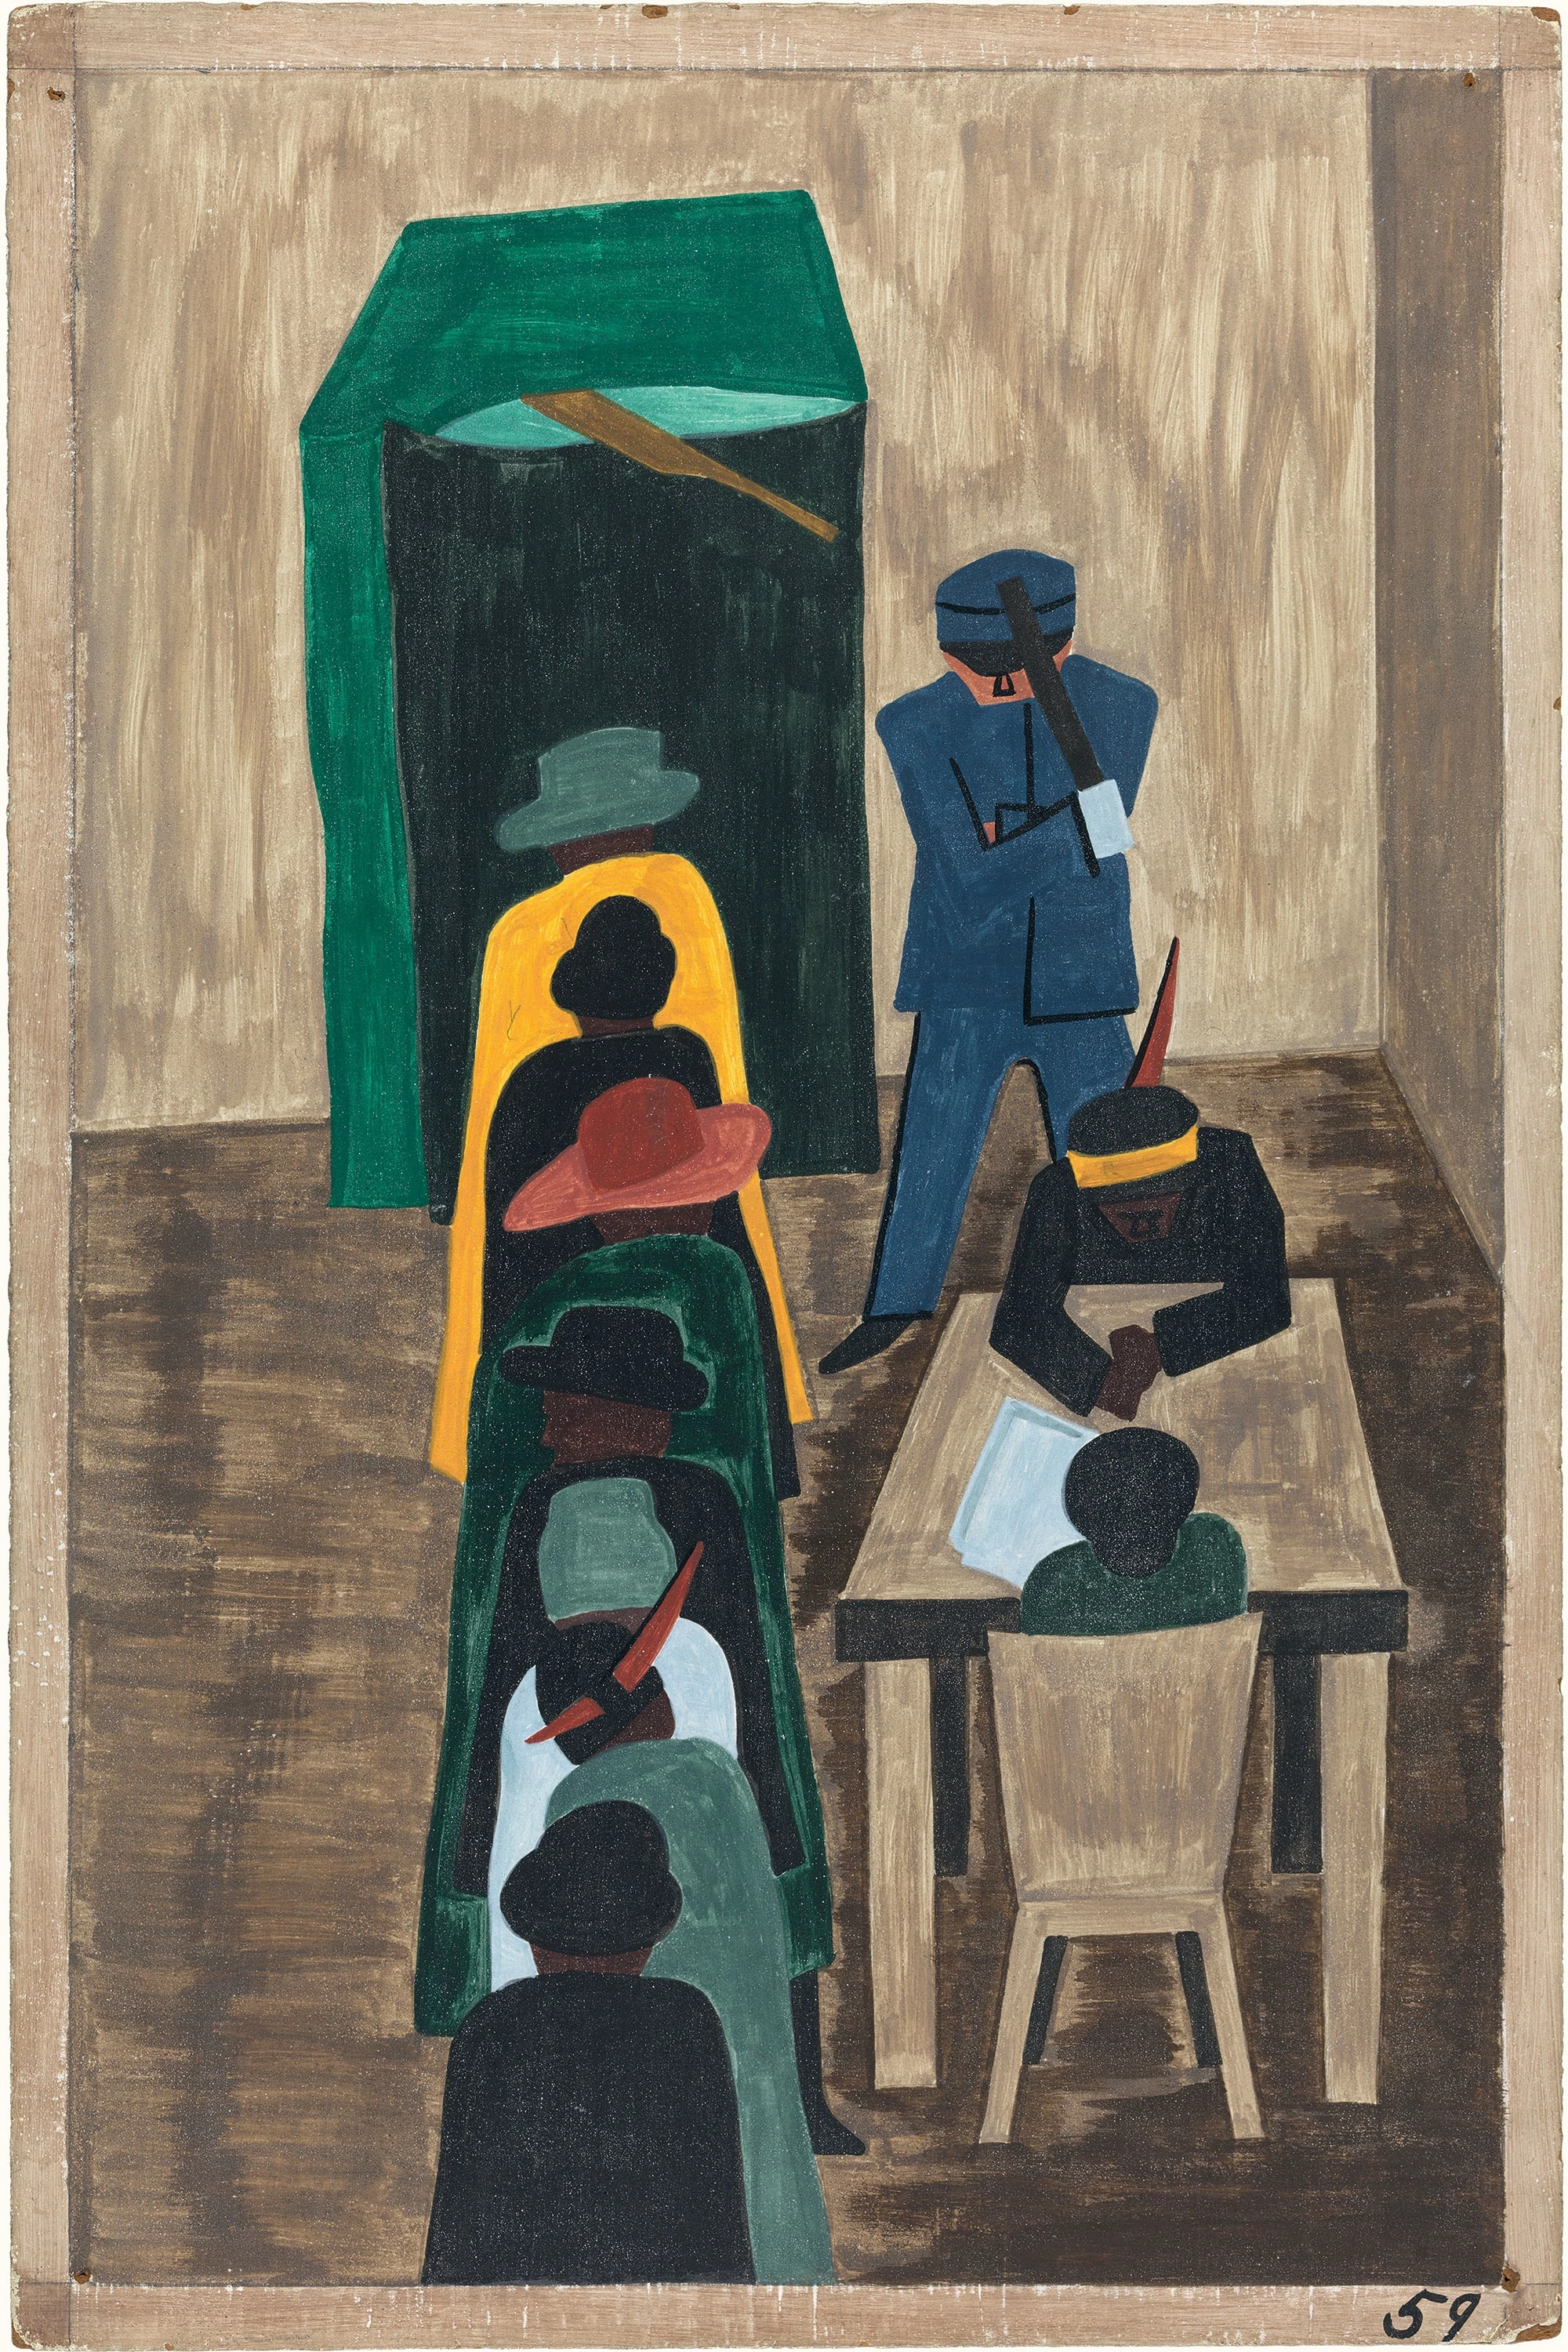 Migration Series No.59: In the North they had the freedom to vote, Jacob Lawrence